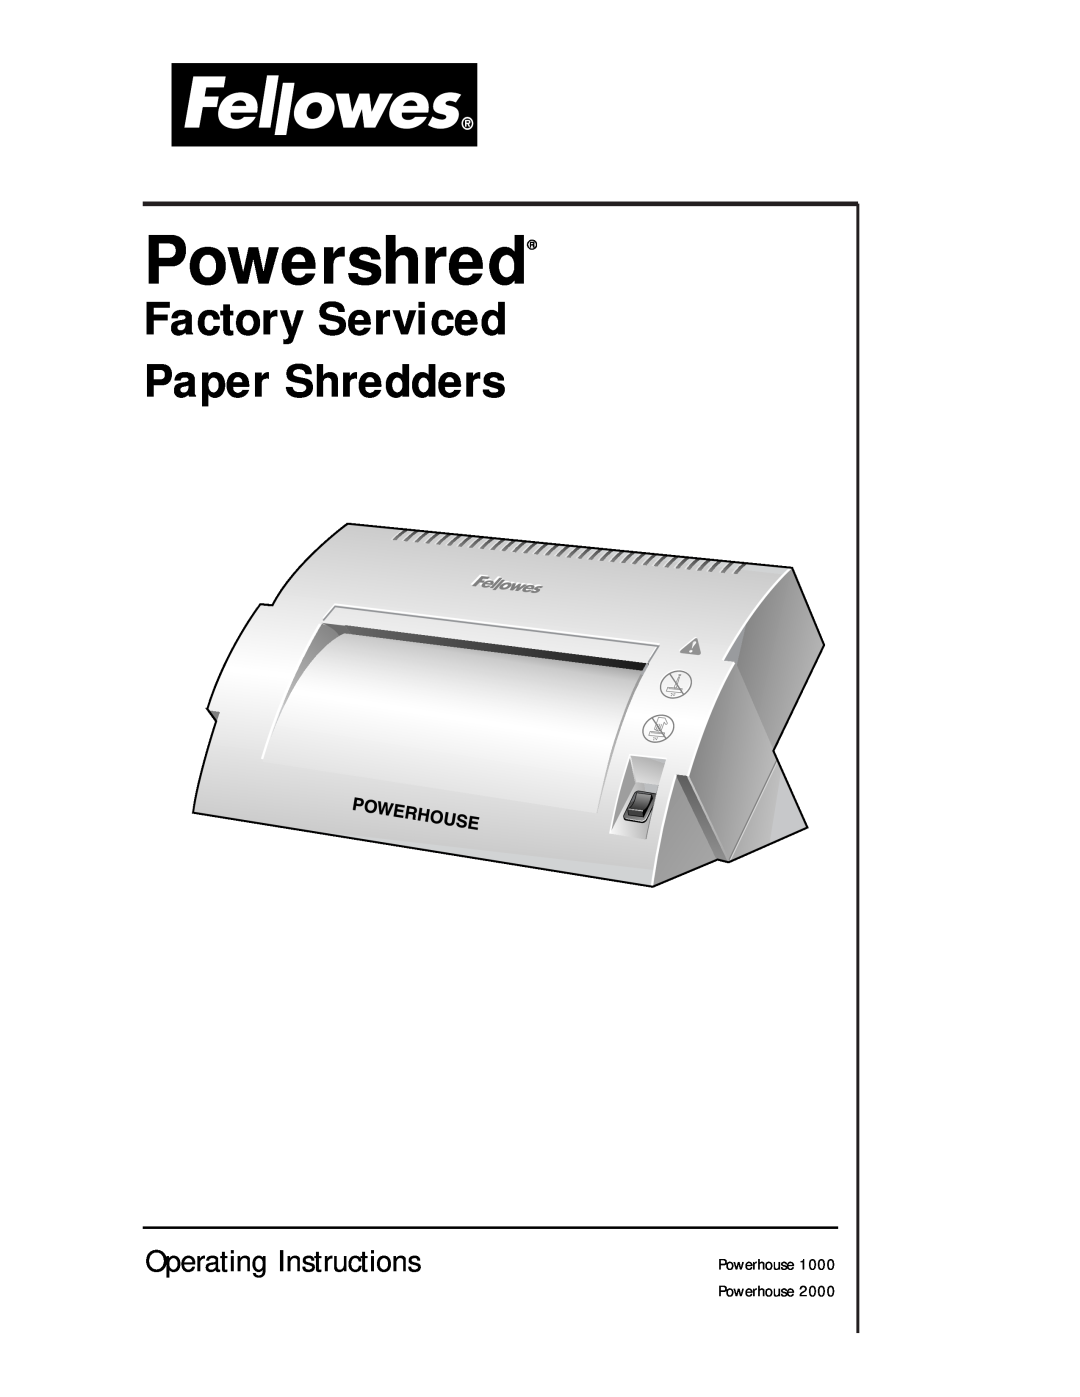 Fellowes 2000, 1000 manual Powershred, Factory Serviced, Paper Shredders, Operating Instructions 